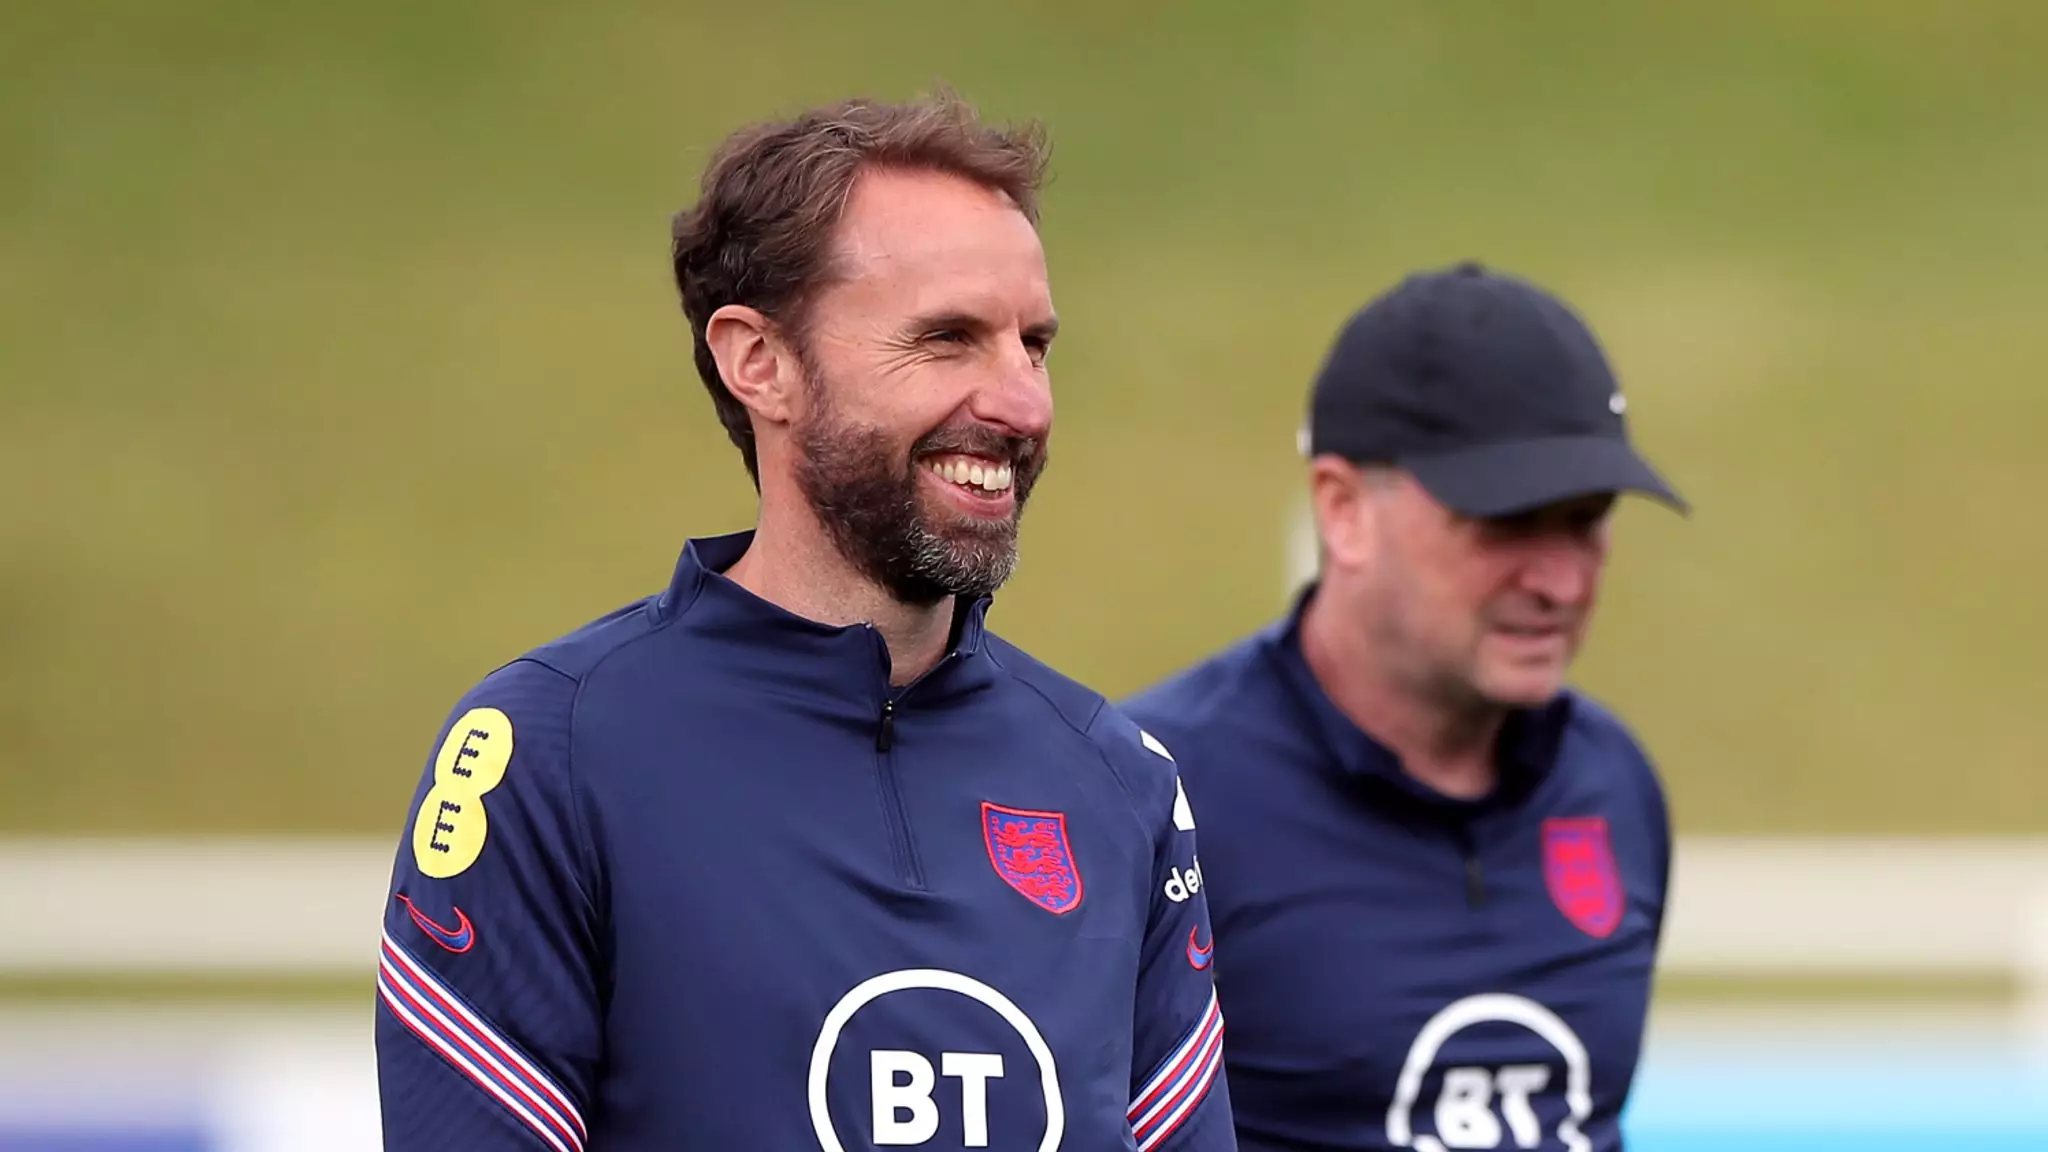 Gareth Southgate's England side boasts one of its most youthful and attacking sides in years.